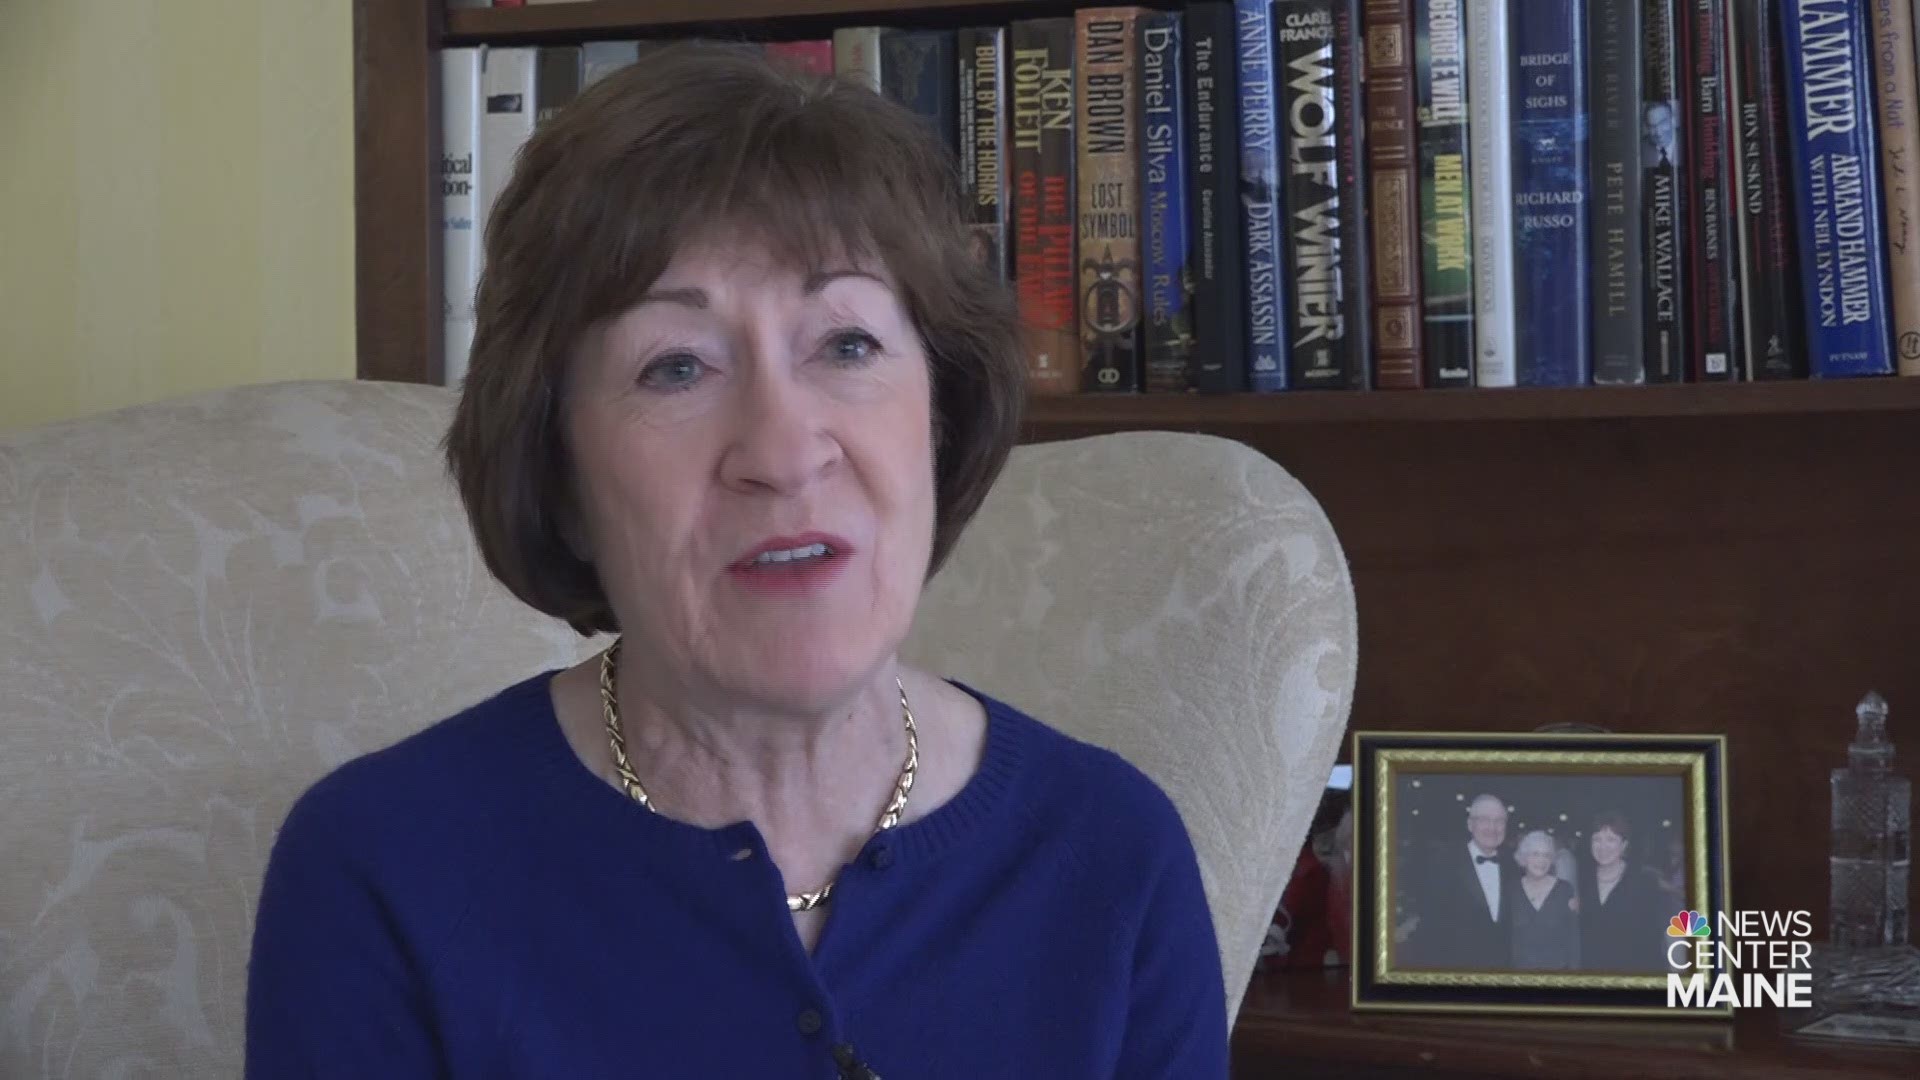 Maine Senator Susan Collins had so many positive memories of the late President George H.W. Bush. here is the full RAW interview